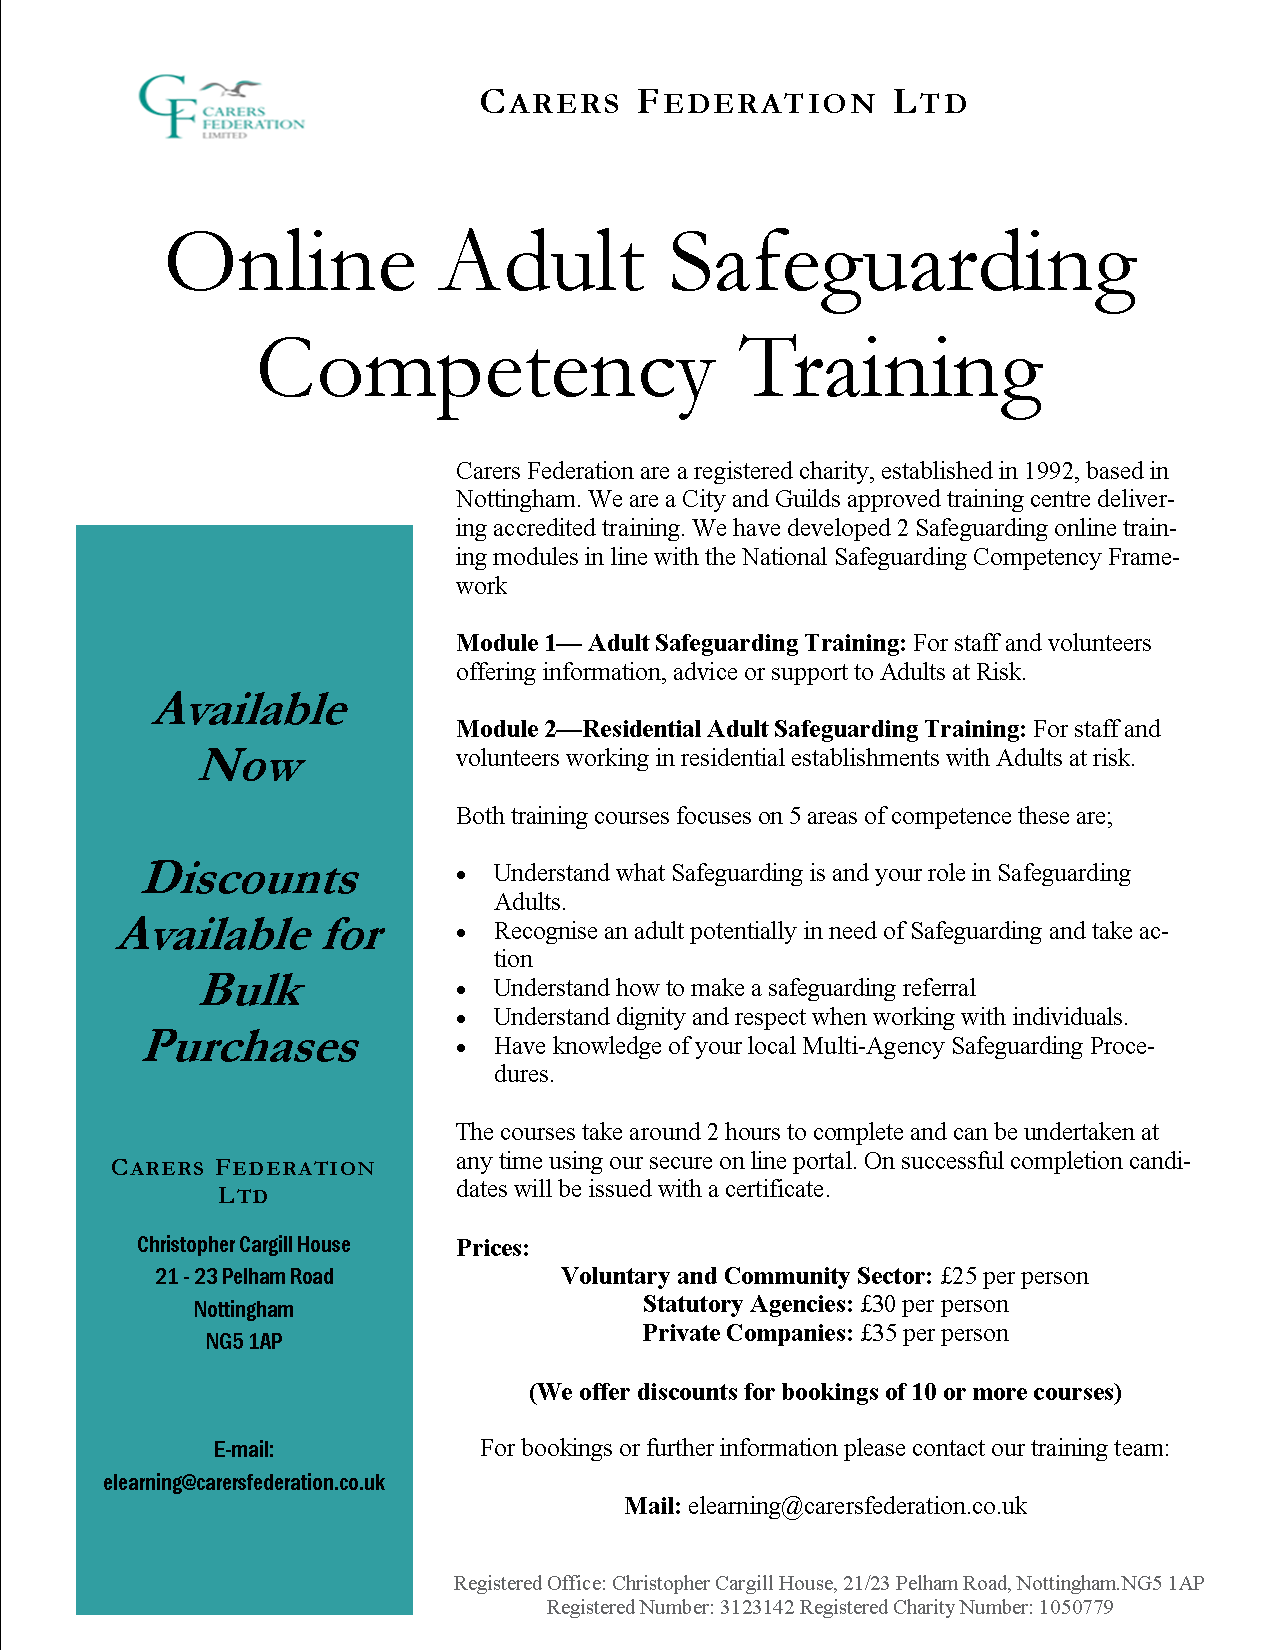 Anexo Safeguarding Training  flyer Feb 2019.png